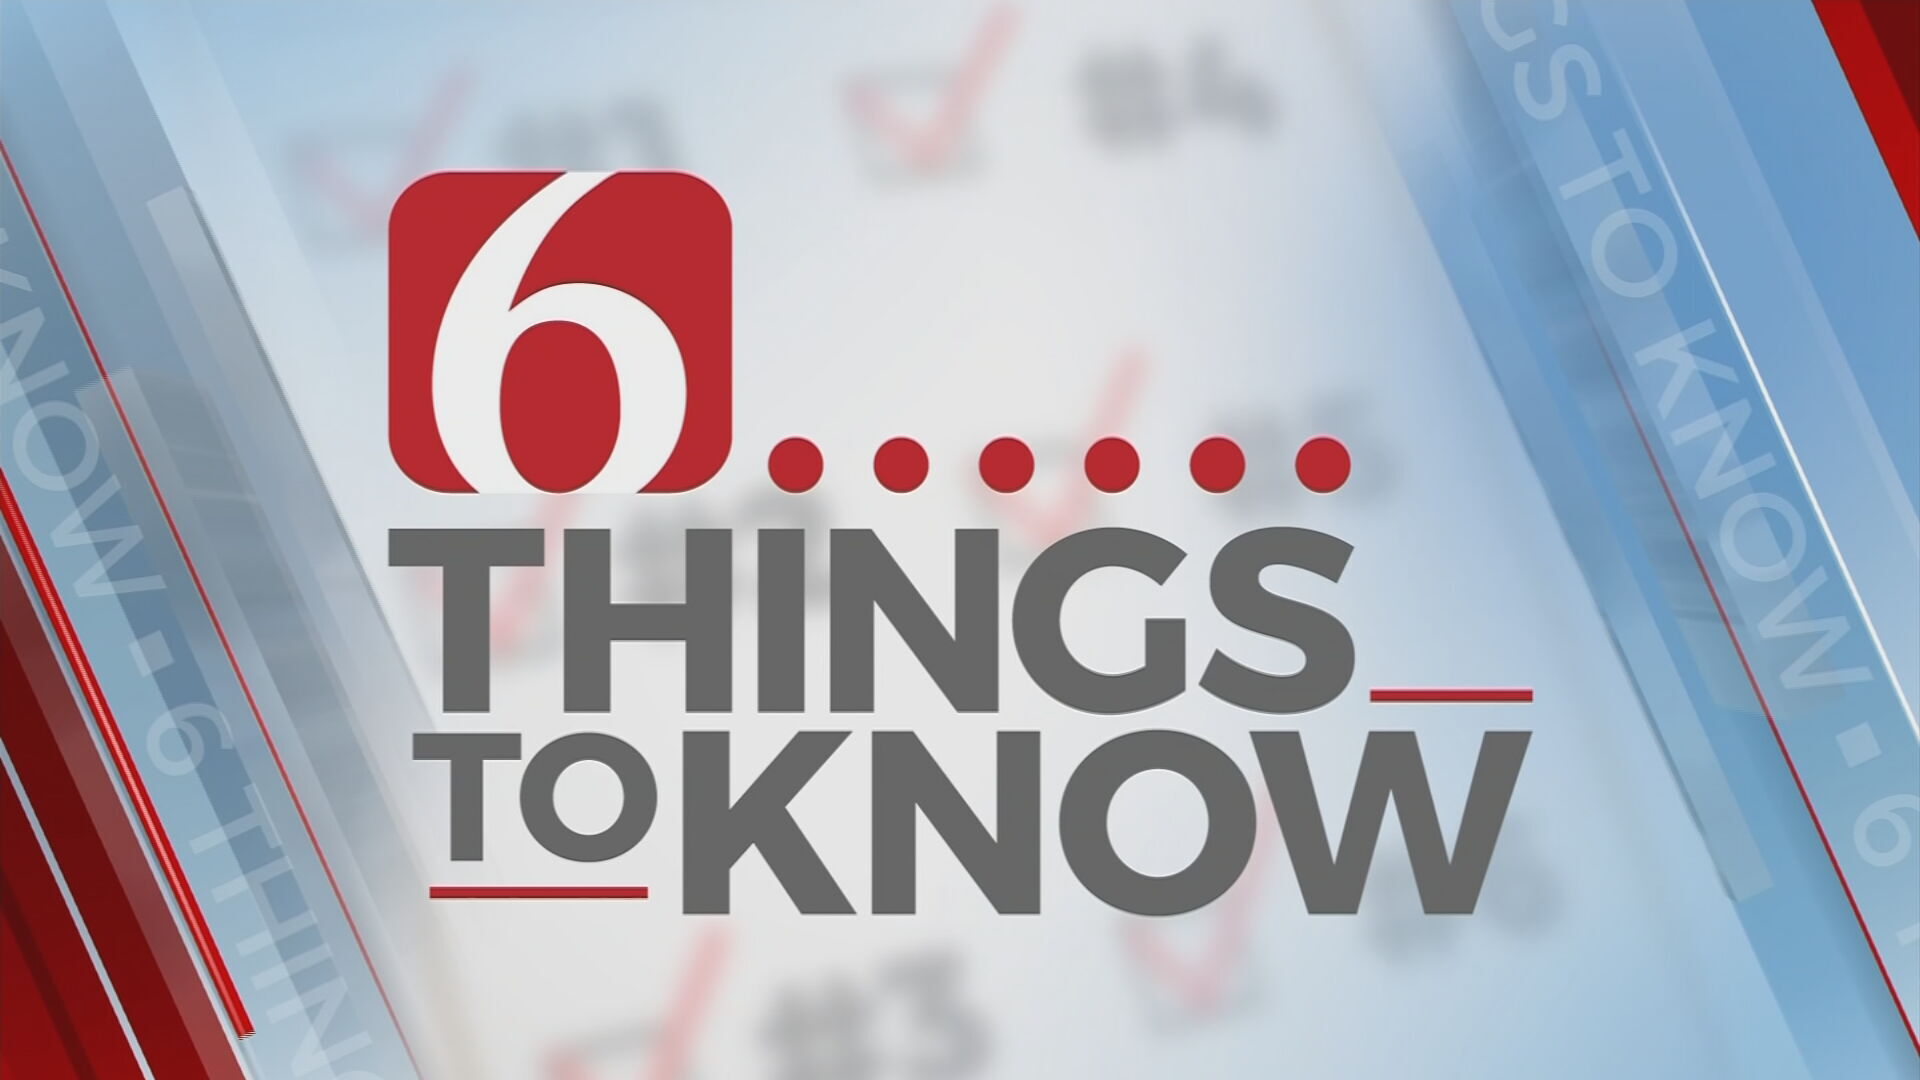 6 Things To Know (Sept 25): RBG Still Making History & Friday Night Lights 